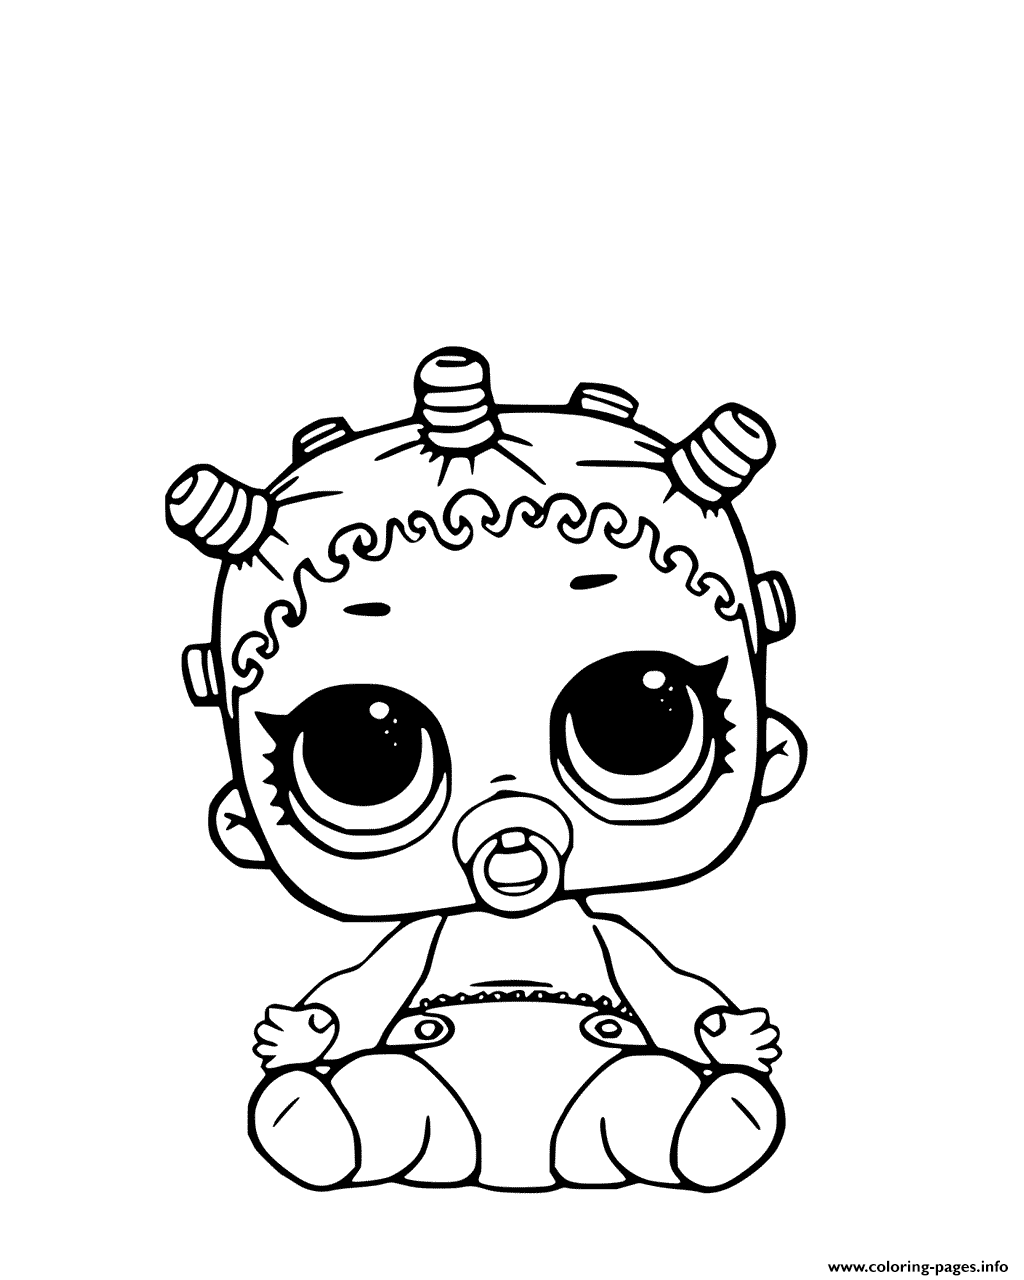 Lil Roller Sk8ter Coloring Page LOL Doll coloring